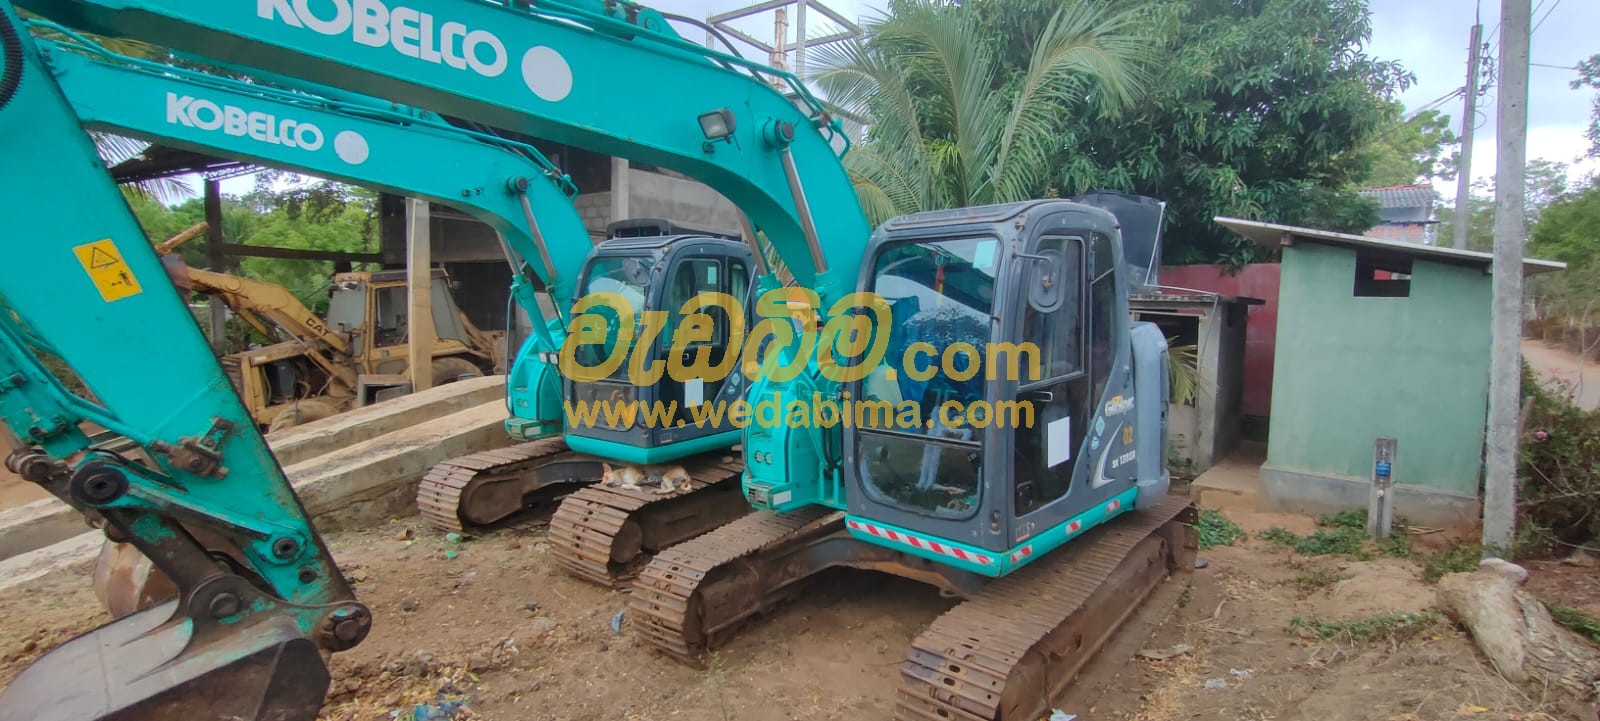 Excavator for rent in colombo